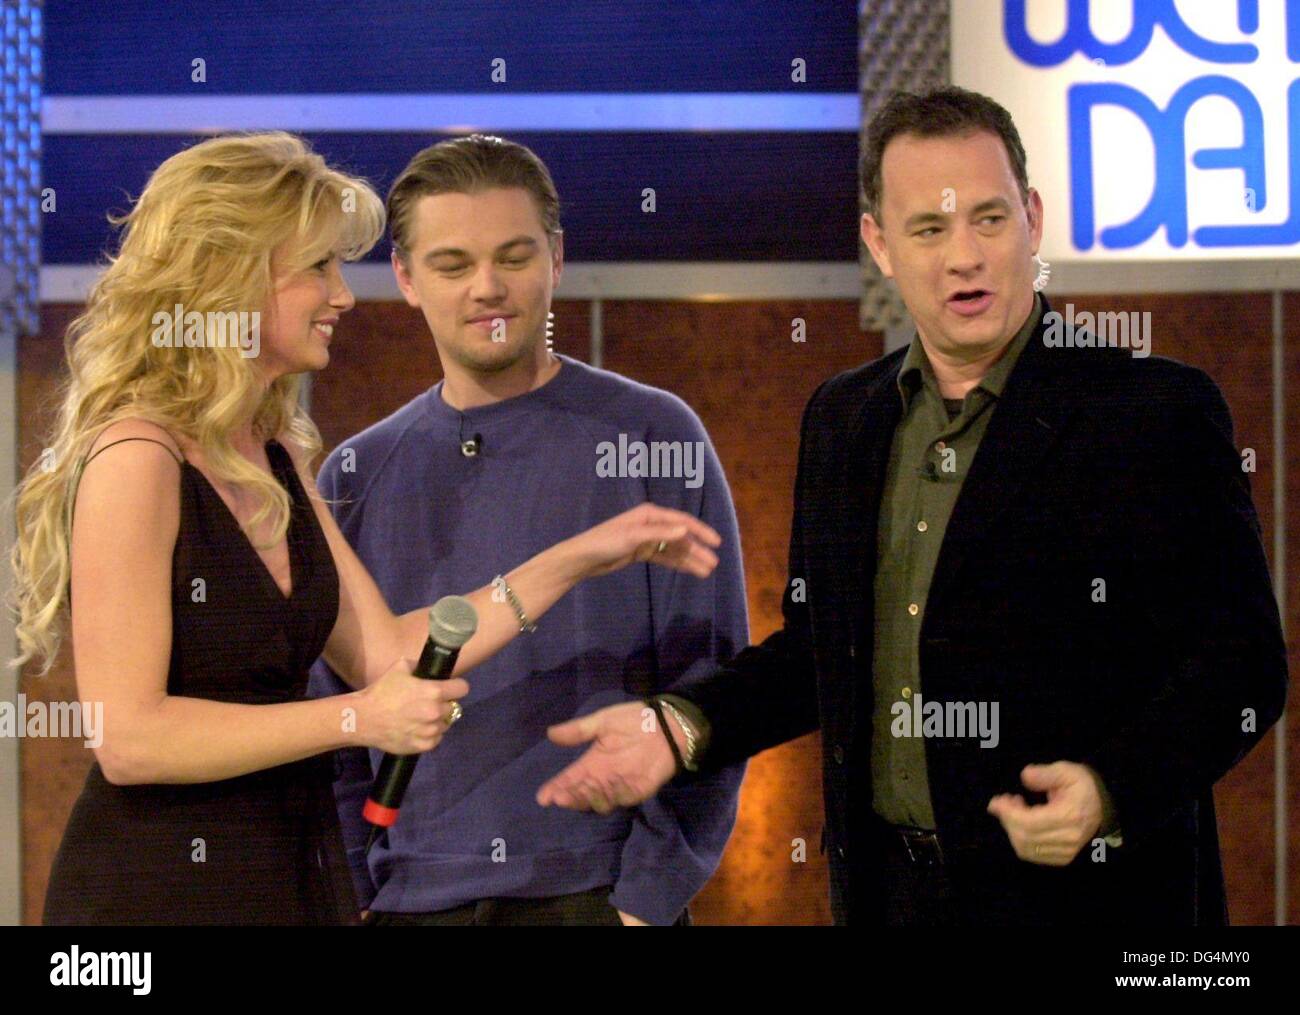 Boeblingen, Germany. 25th Jan, 2003. (dpa) - US singer Faith Hill (L) greets US actors Leonardo DiCaprio (C) and Tom Hanks (R) during the German TV show 'Wetten dass.?' (bet that.?), in Boeblingen, Germany, 25 January 2003. The two Hollywood stars promoted their new film 'Catch Me If You Can' during Germany's most successful TV show. © dpa/Alamy Live News Stock Photo